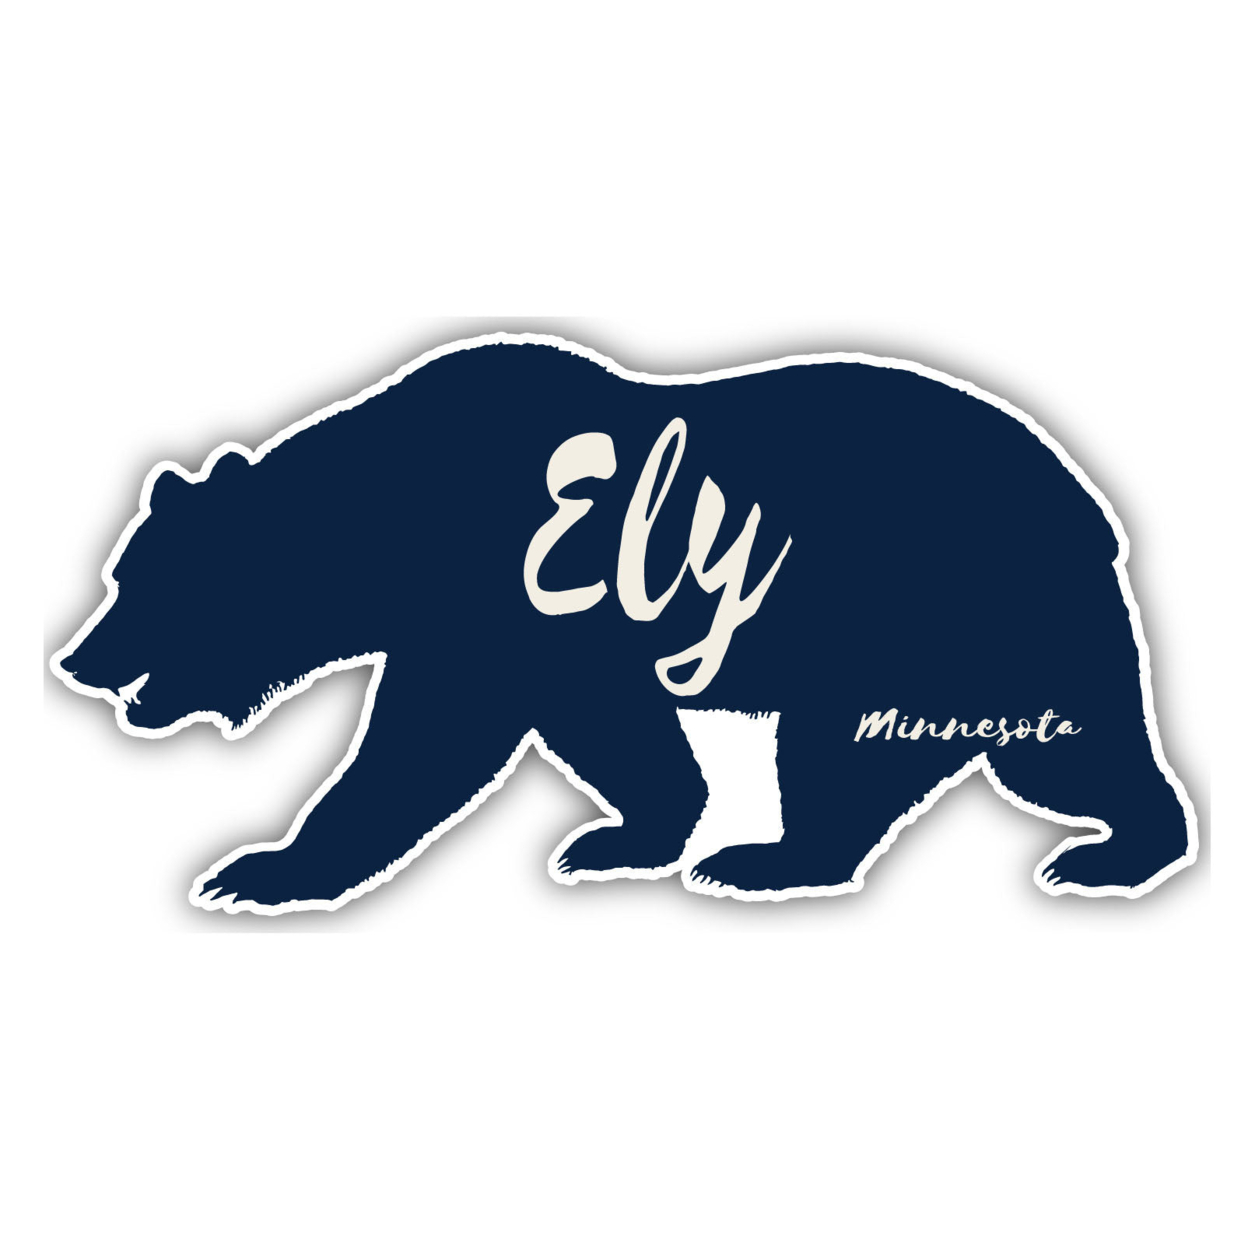 Ely Minnesota Souvenir Decorative Stickers (Choose Theme And Size) - 4-Pack, 2-Inch, Bear